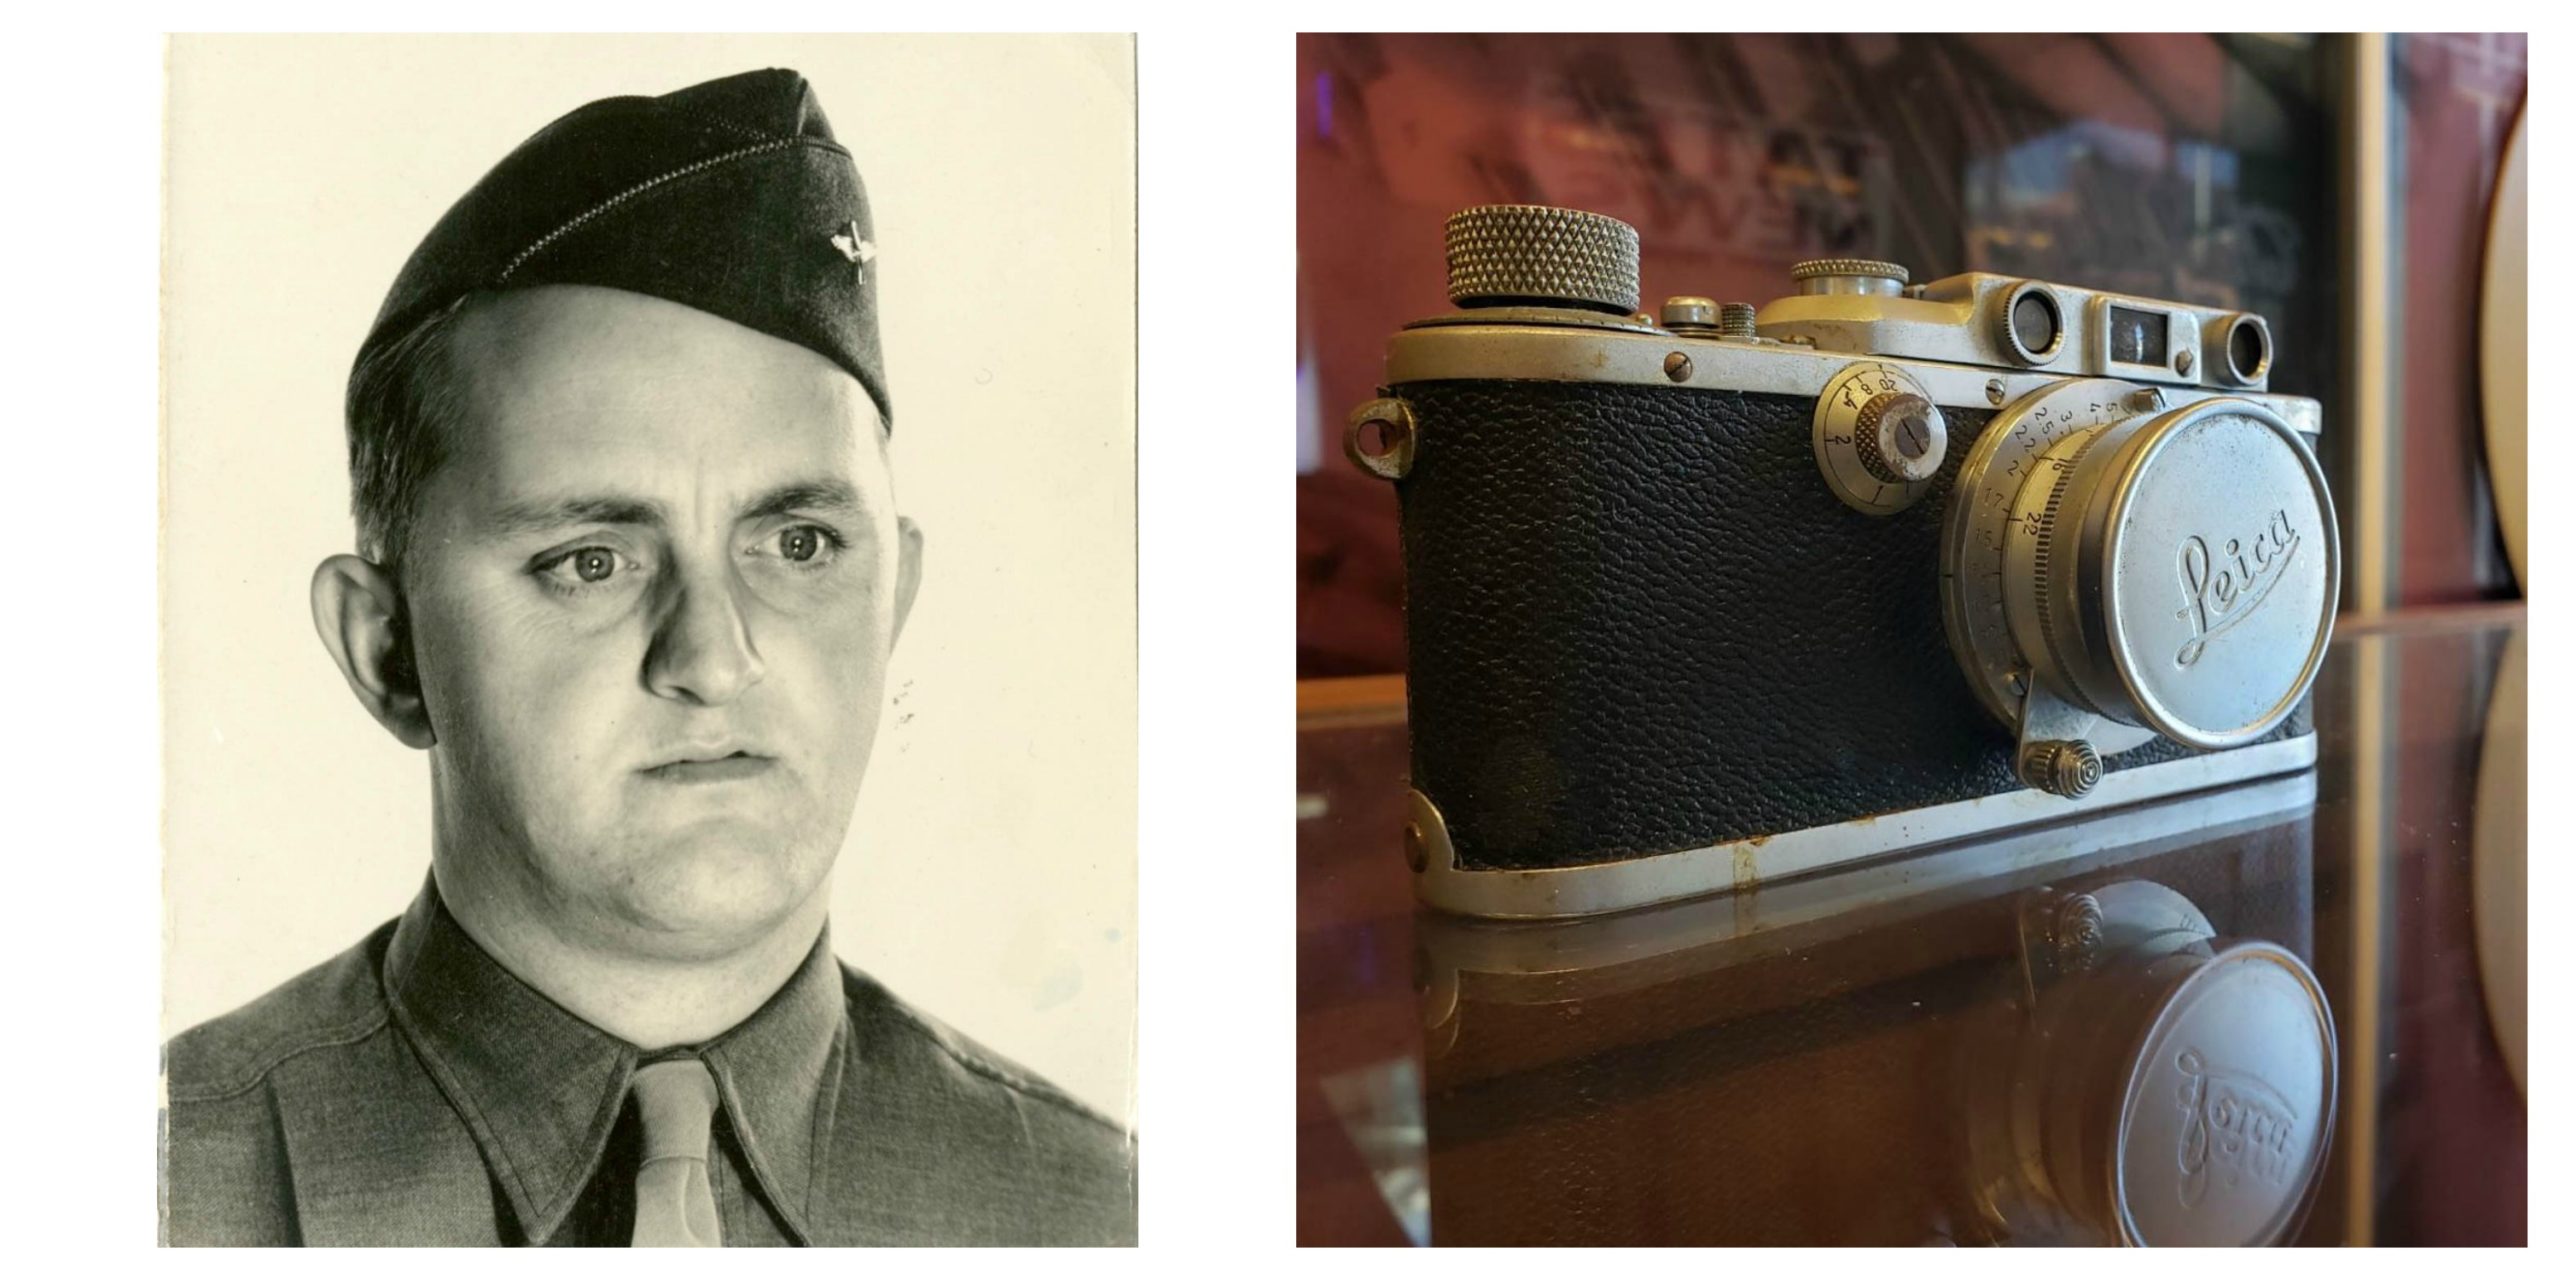 Left: Portrait of William Lawrence Inscho Sr. in his military uniform. Right:  Picture of Inscho Sr.'s Leica camera.